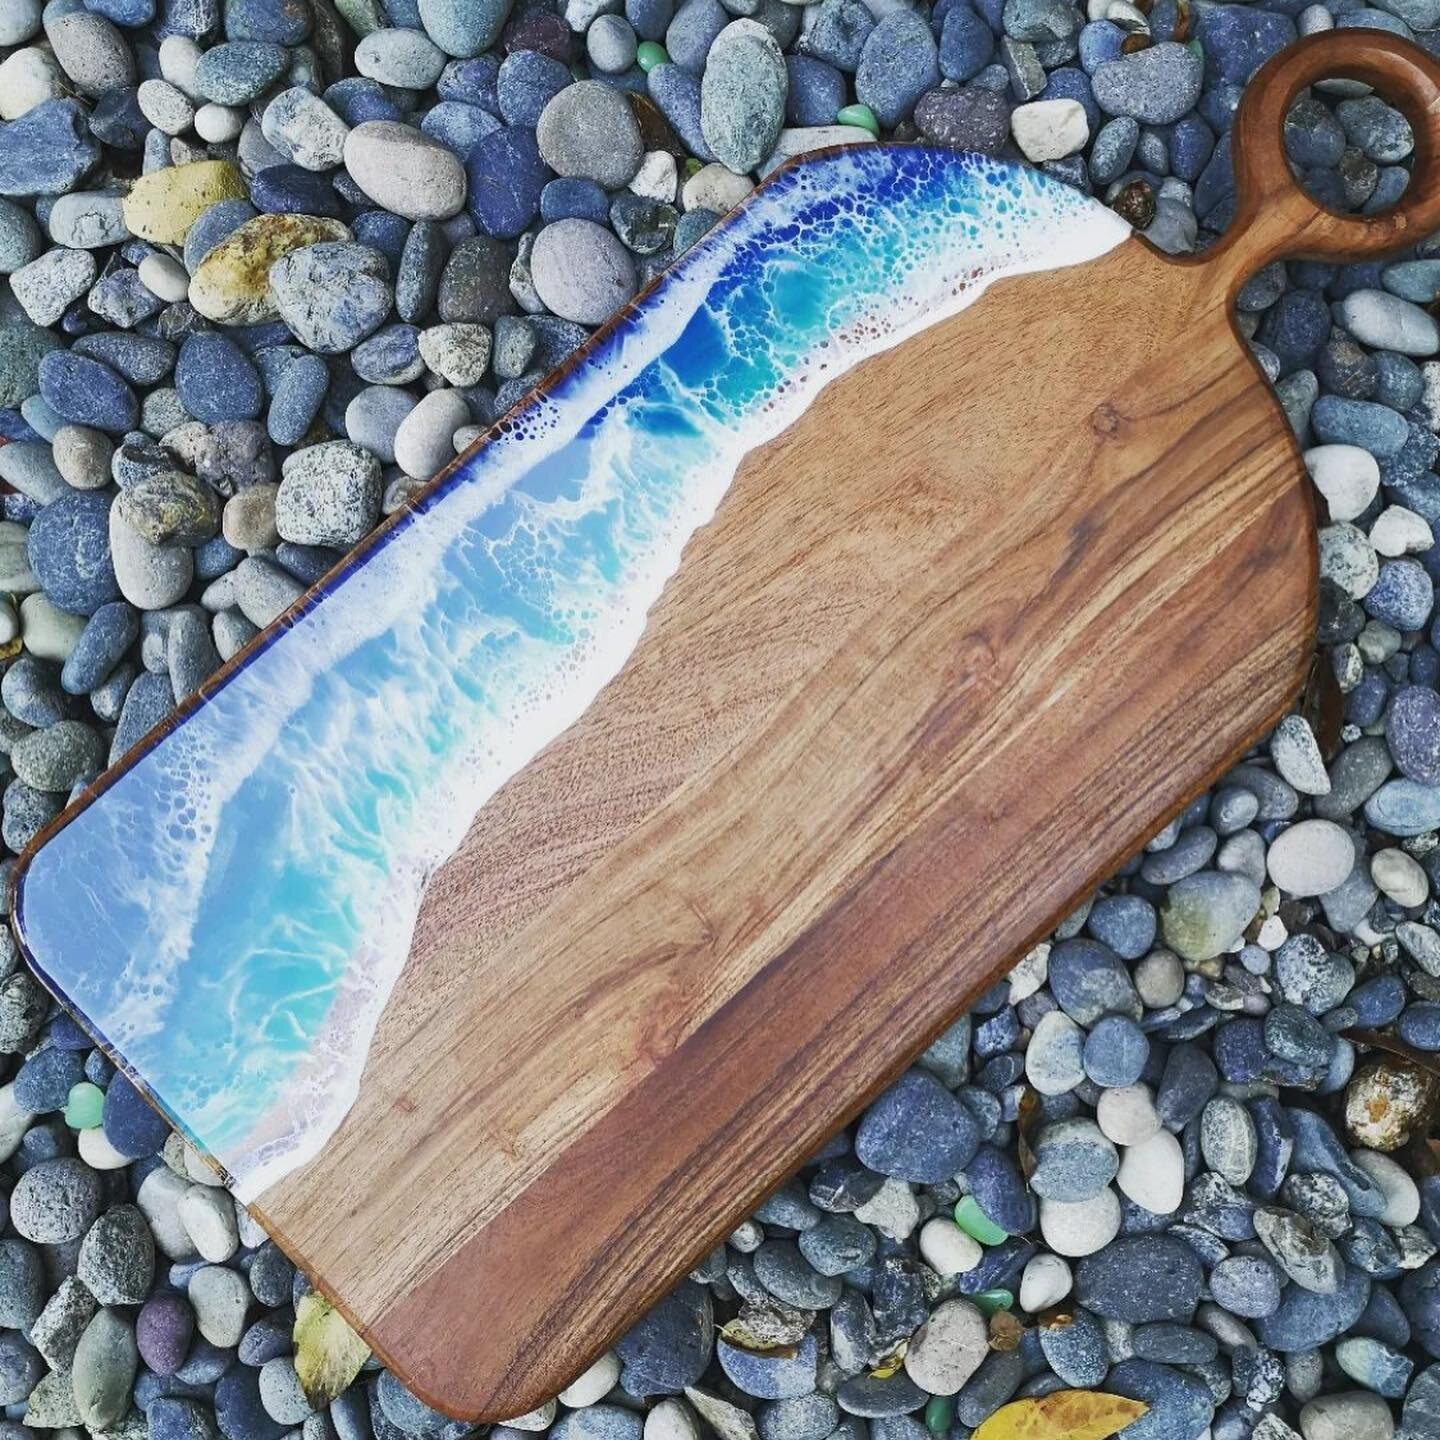 @moonlit.art.studios will be back with their handmade wood and resin art! Most of which doubles as things like charcuterie boards and crib boards for all the more use! 💙